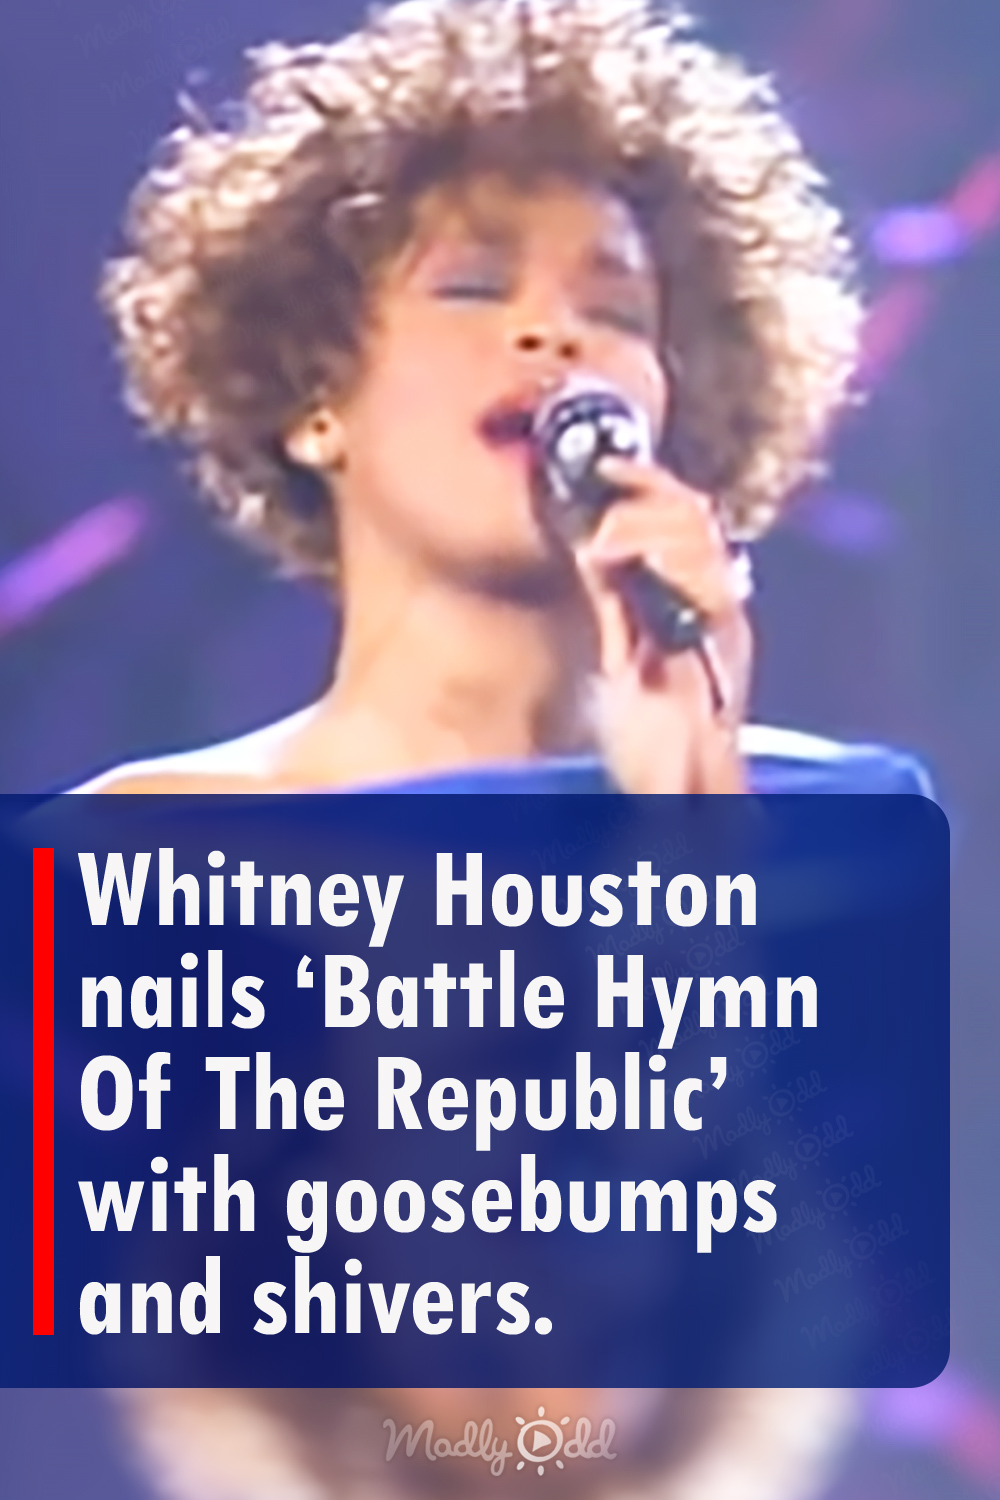 Whitney Houston nails ‘Battle Hymn Of The Republic’ with goosebumps and shivers.